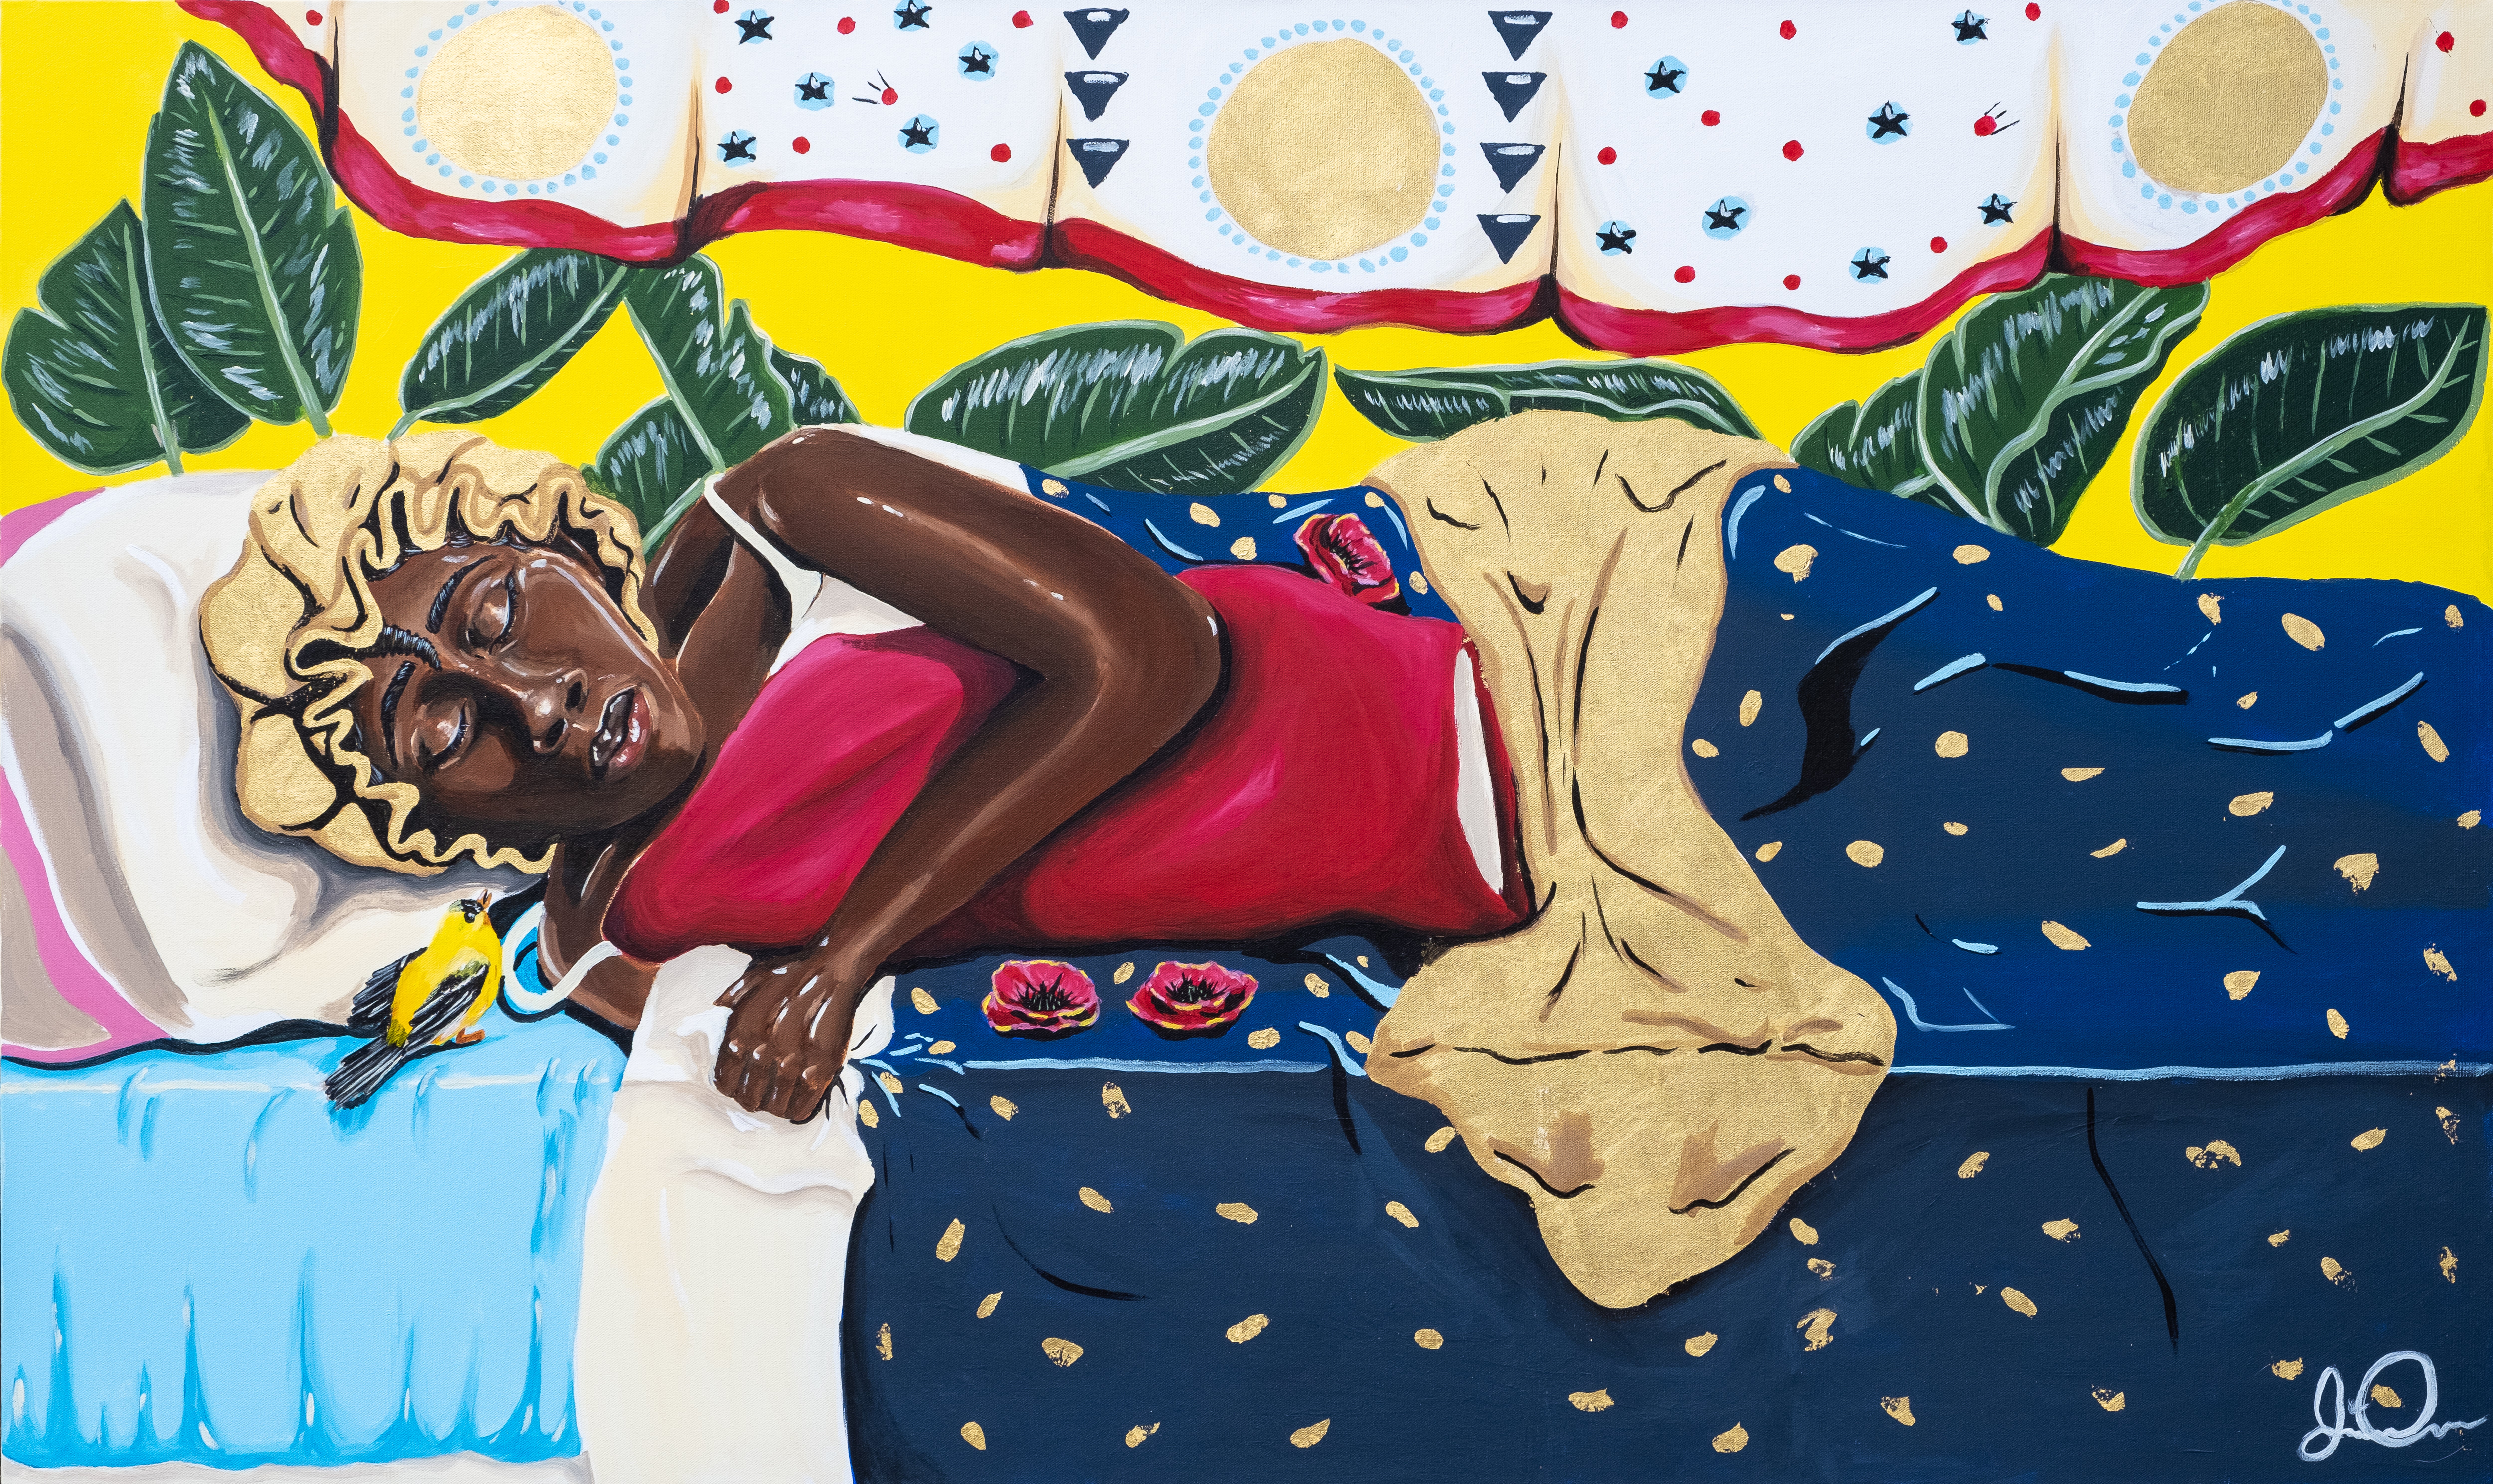 Horizontal format painting of a Black woman asleep in her bed. 